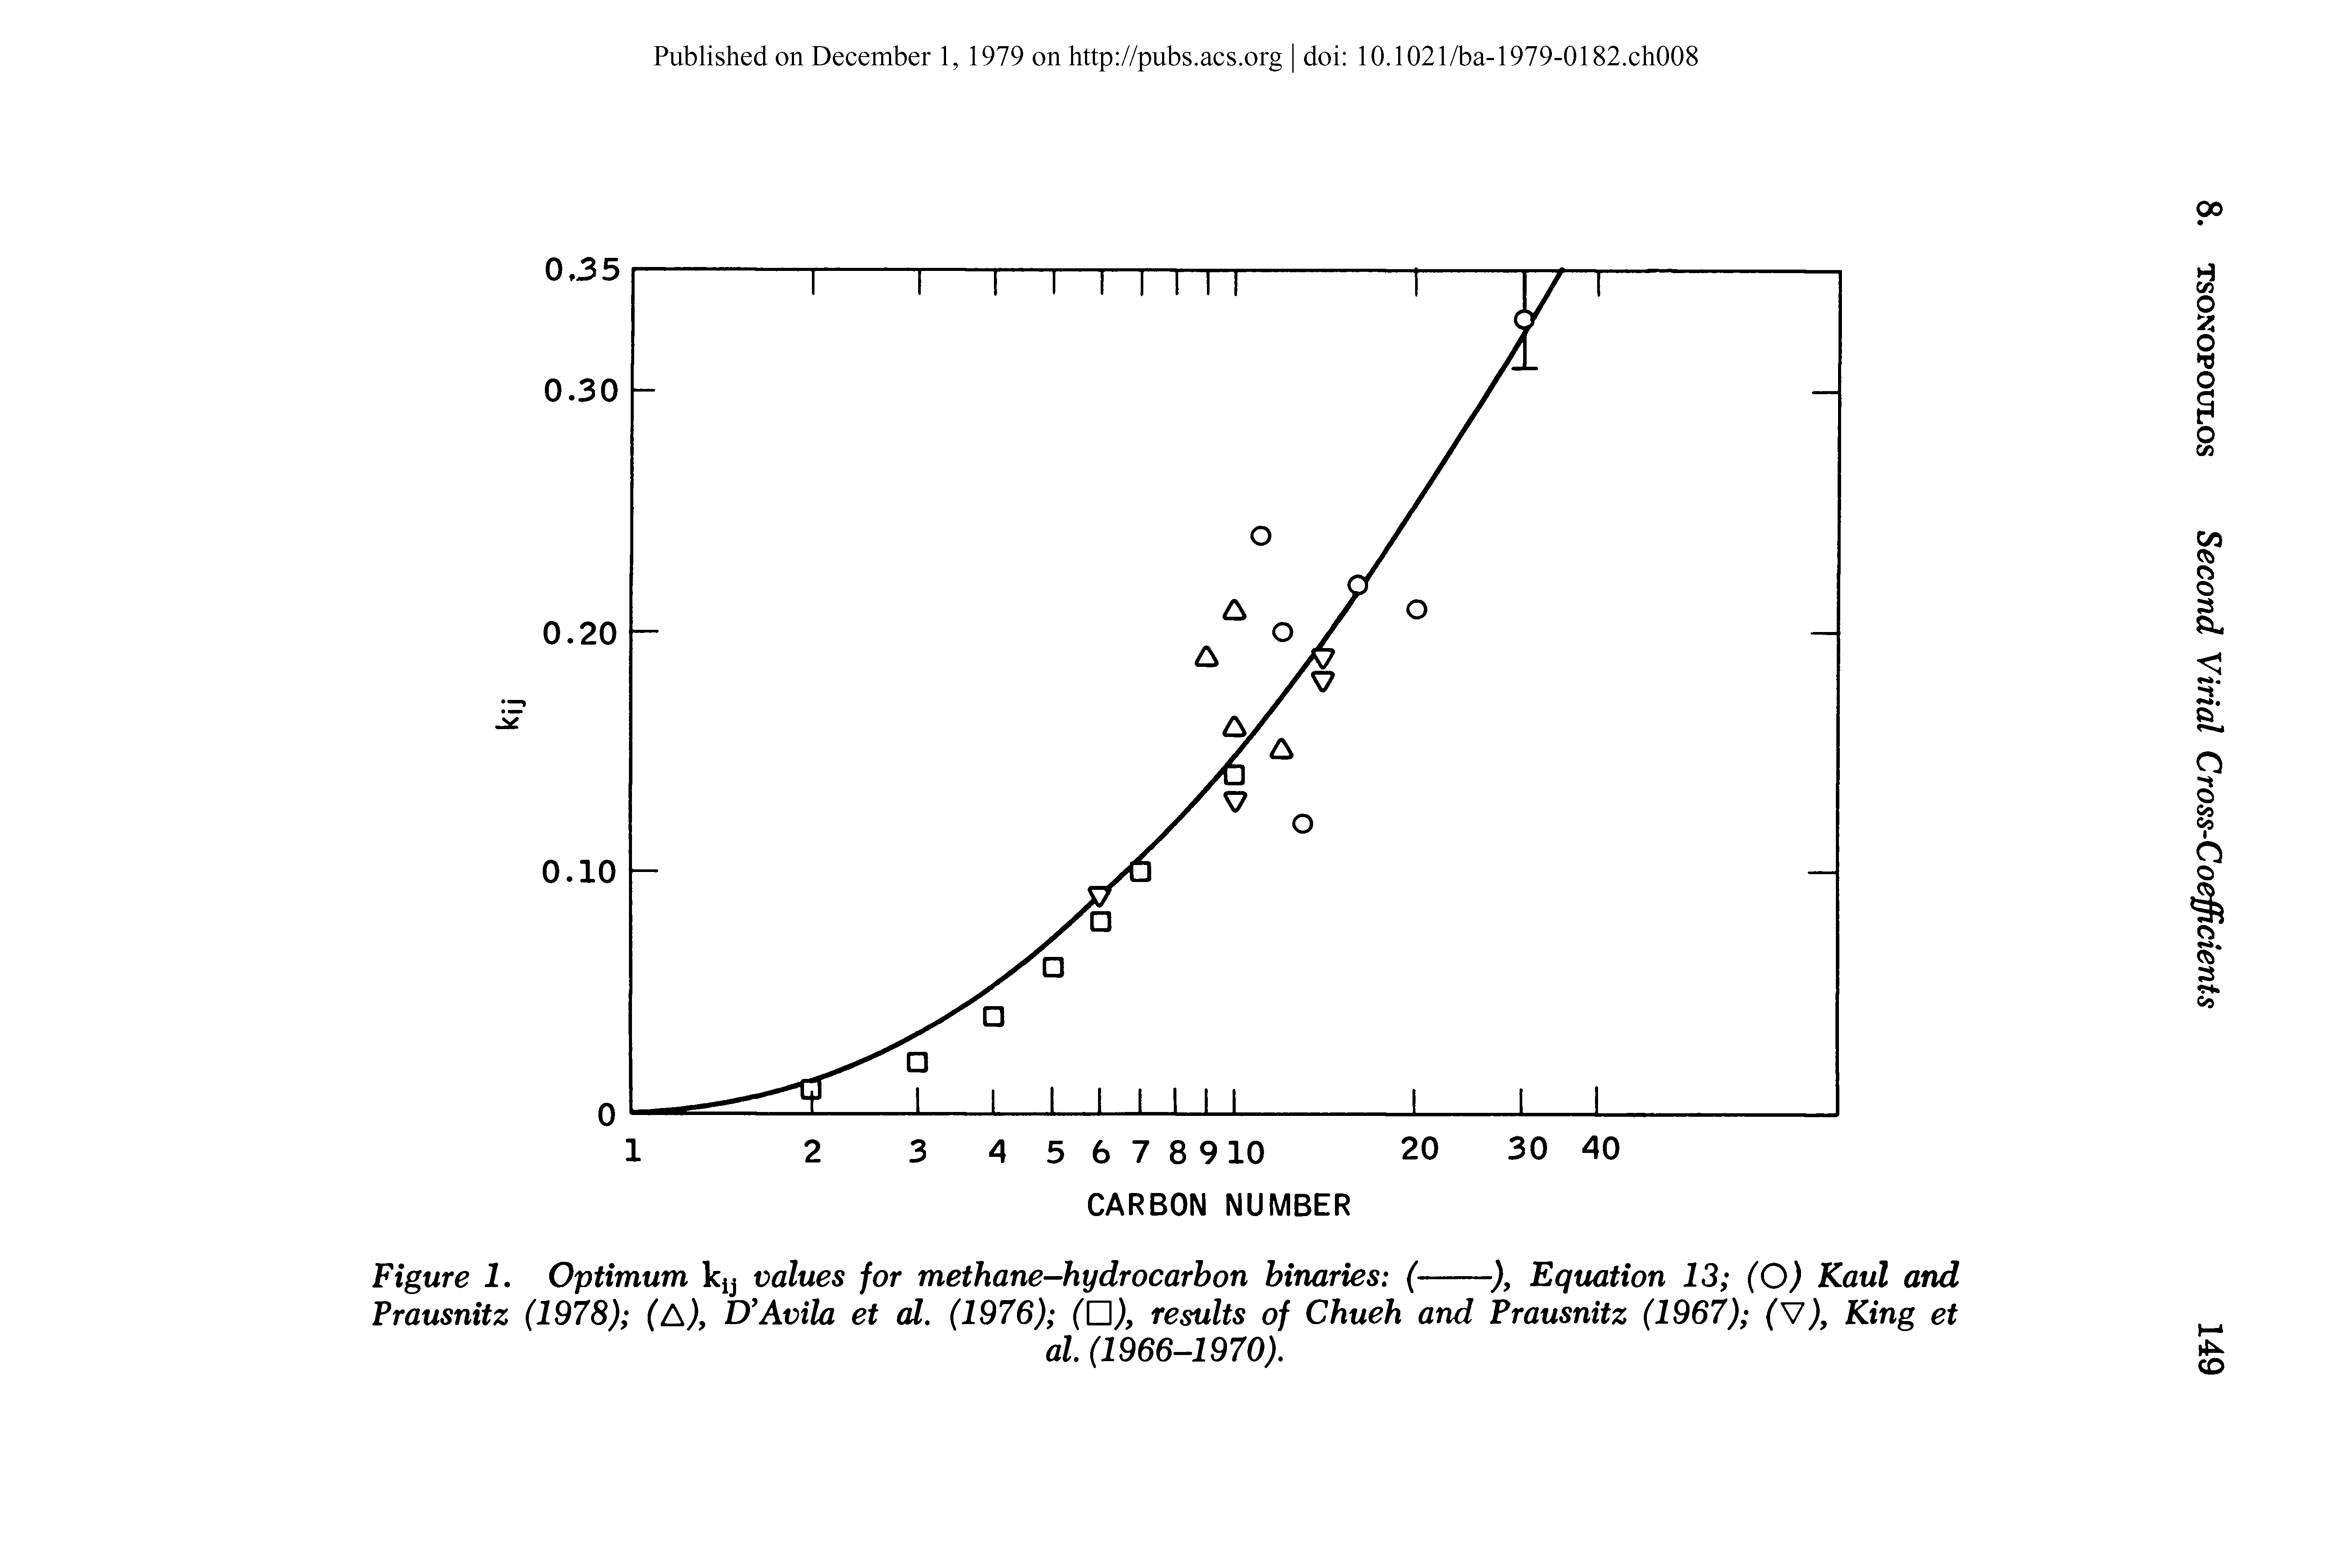 Figure 1. Optimum ky values for methane-hydrocarbon binaries (-----), Equation 13 (O) Kaul and...